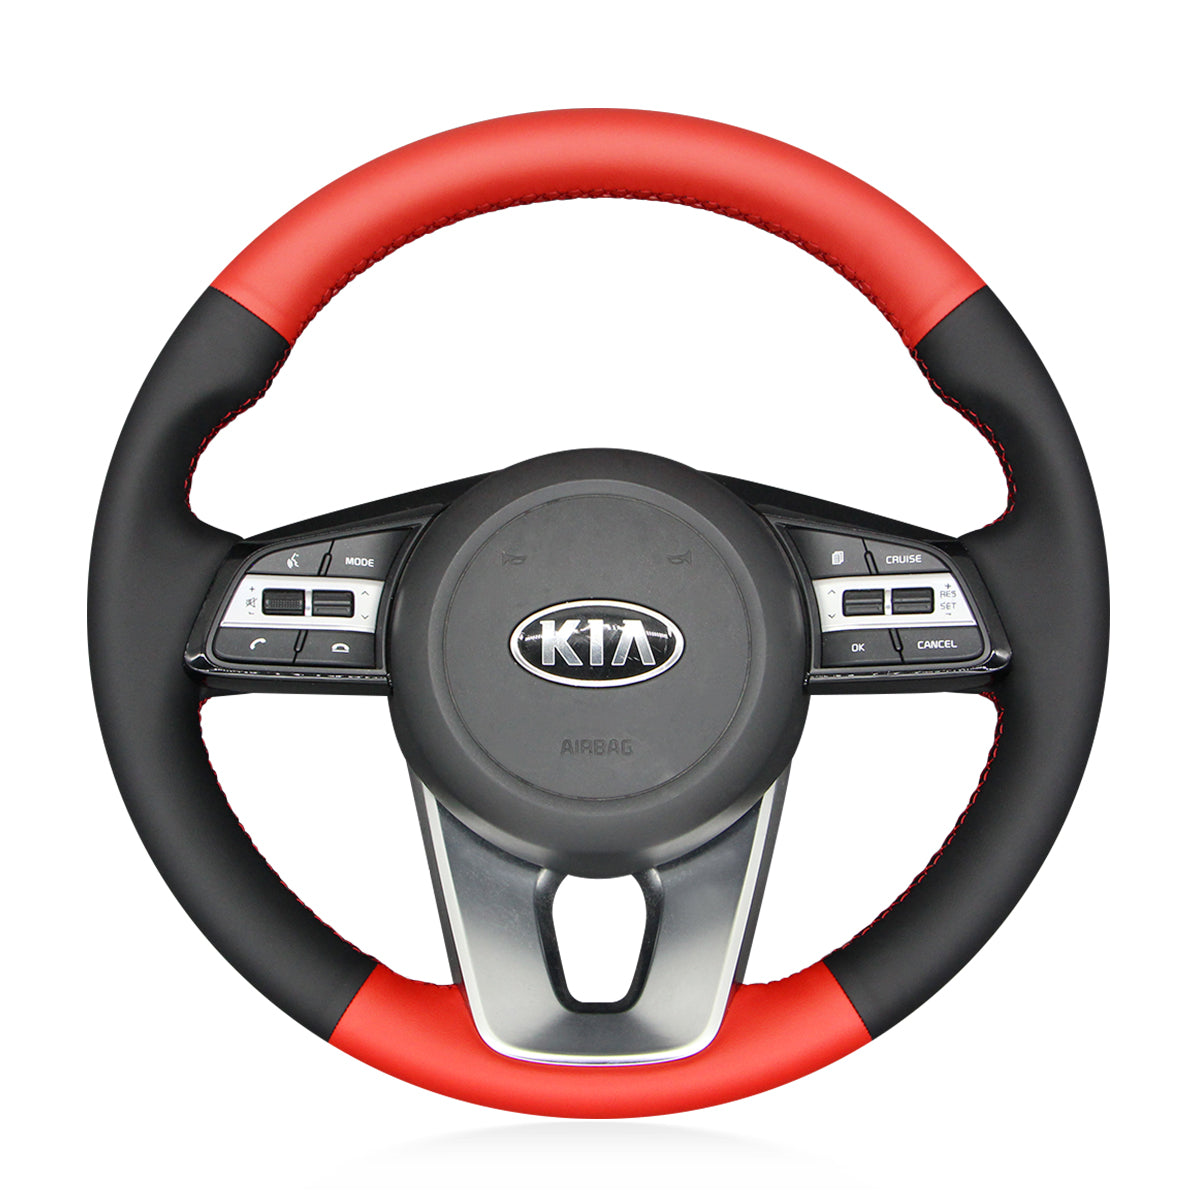 MEWANT Hand Stitch Black Leather Suede Car Steering Wheel Cover for Kia K5 Optima 2019  Cee'd Ceed 2019 Forte 2019 Cerato (AU) 2018-2019